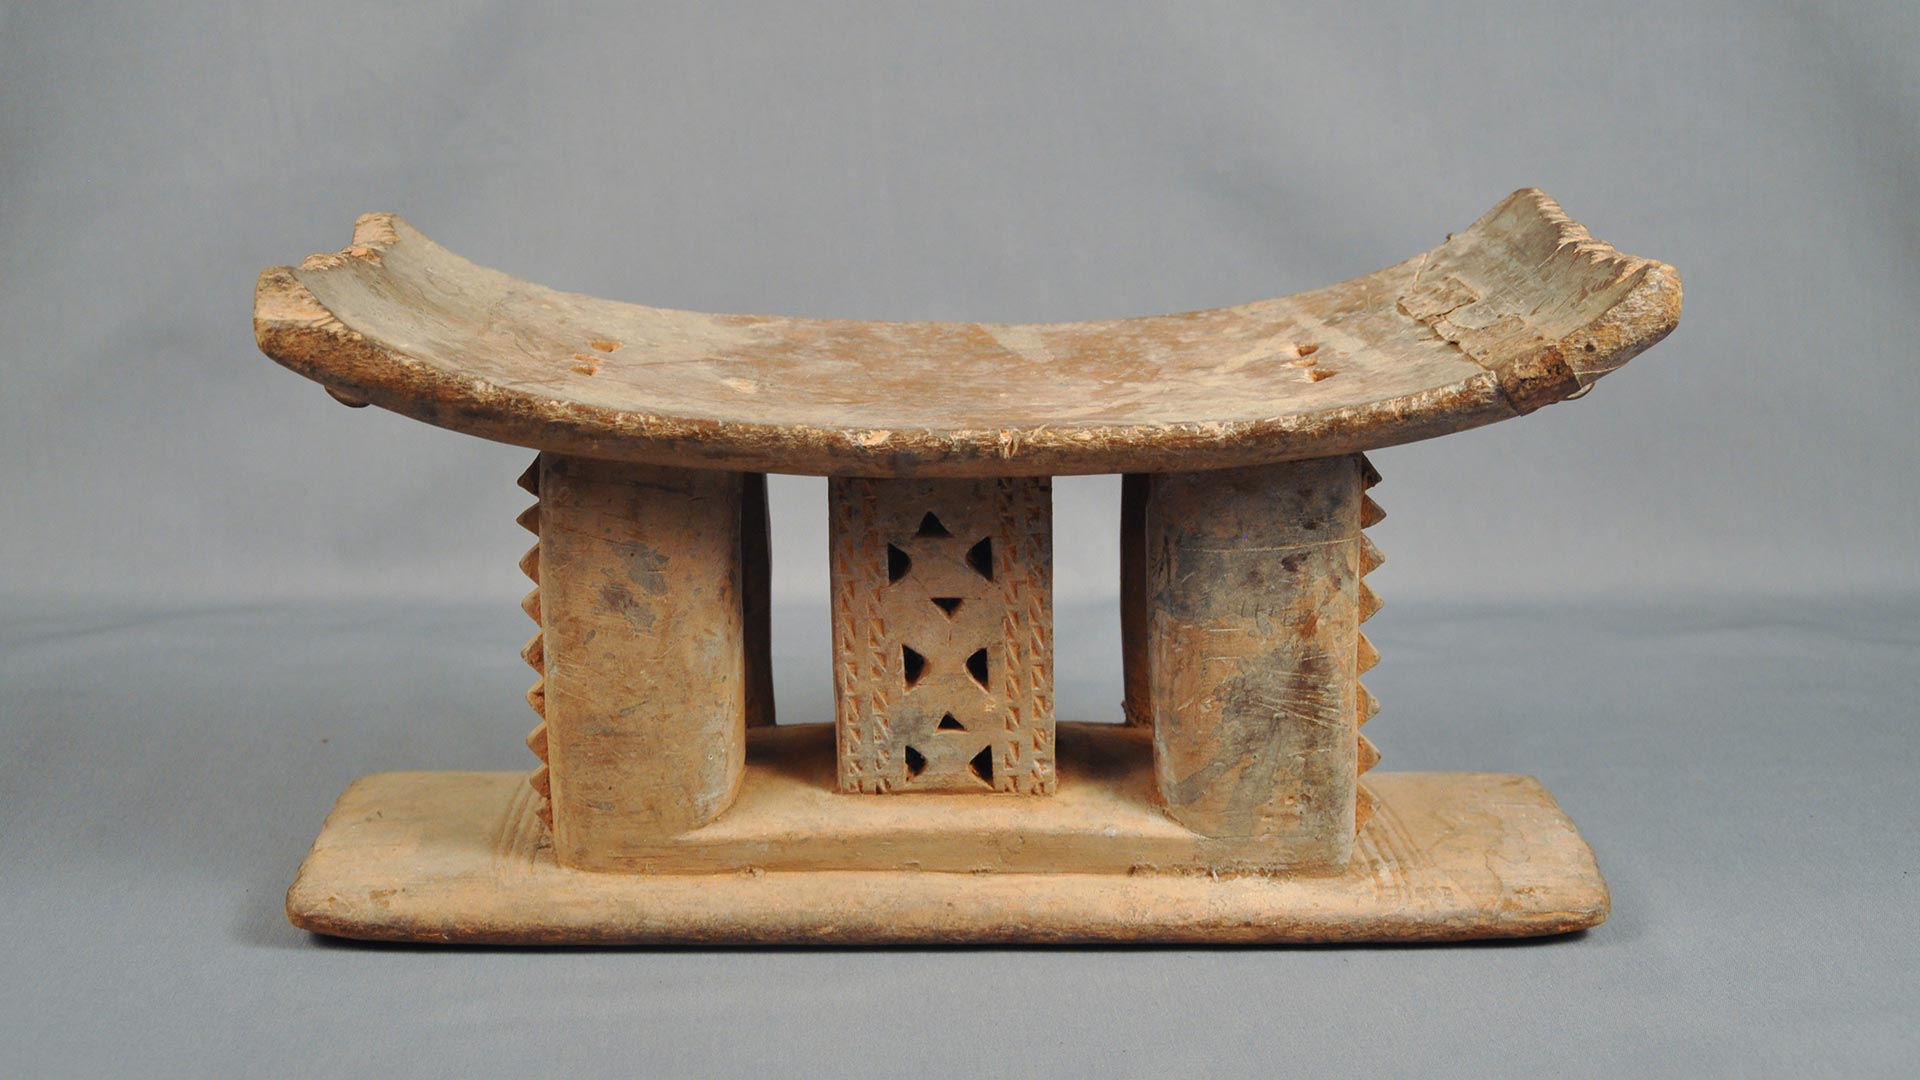 A wooden stool with a concave seat, and three carved pillared supports on a flat base